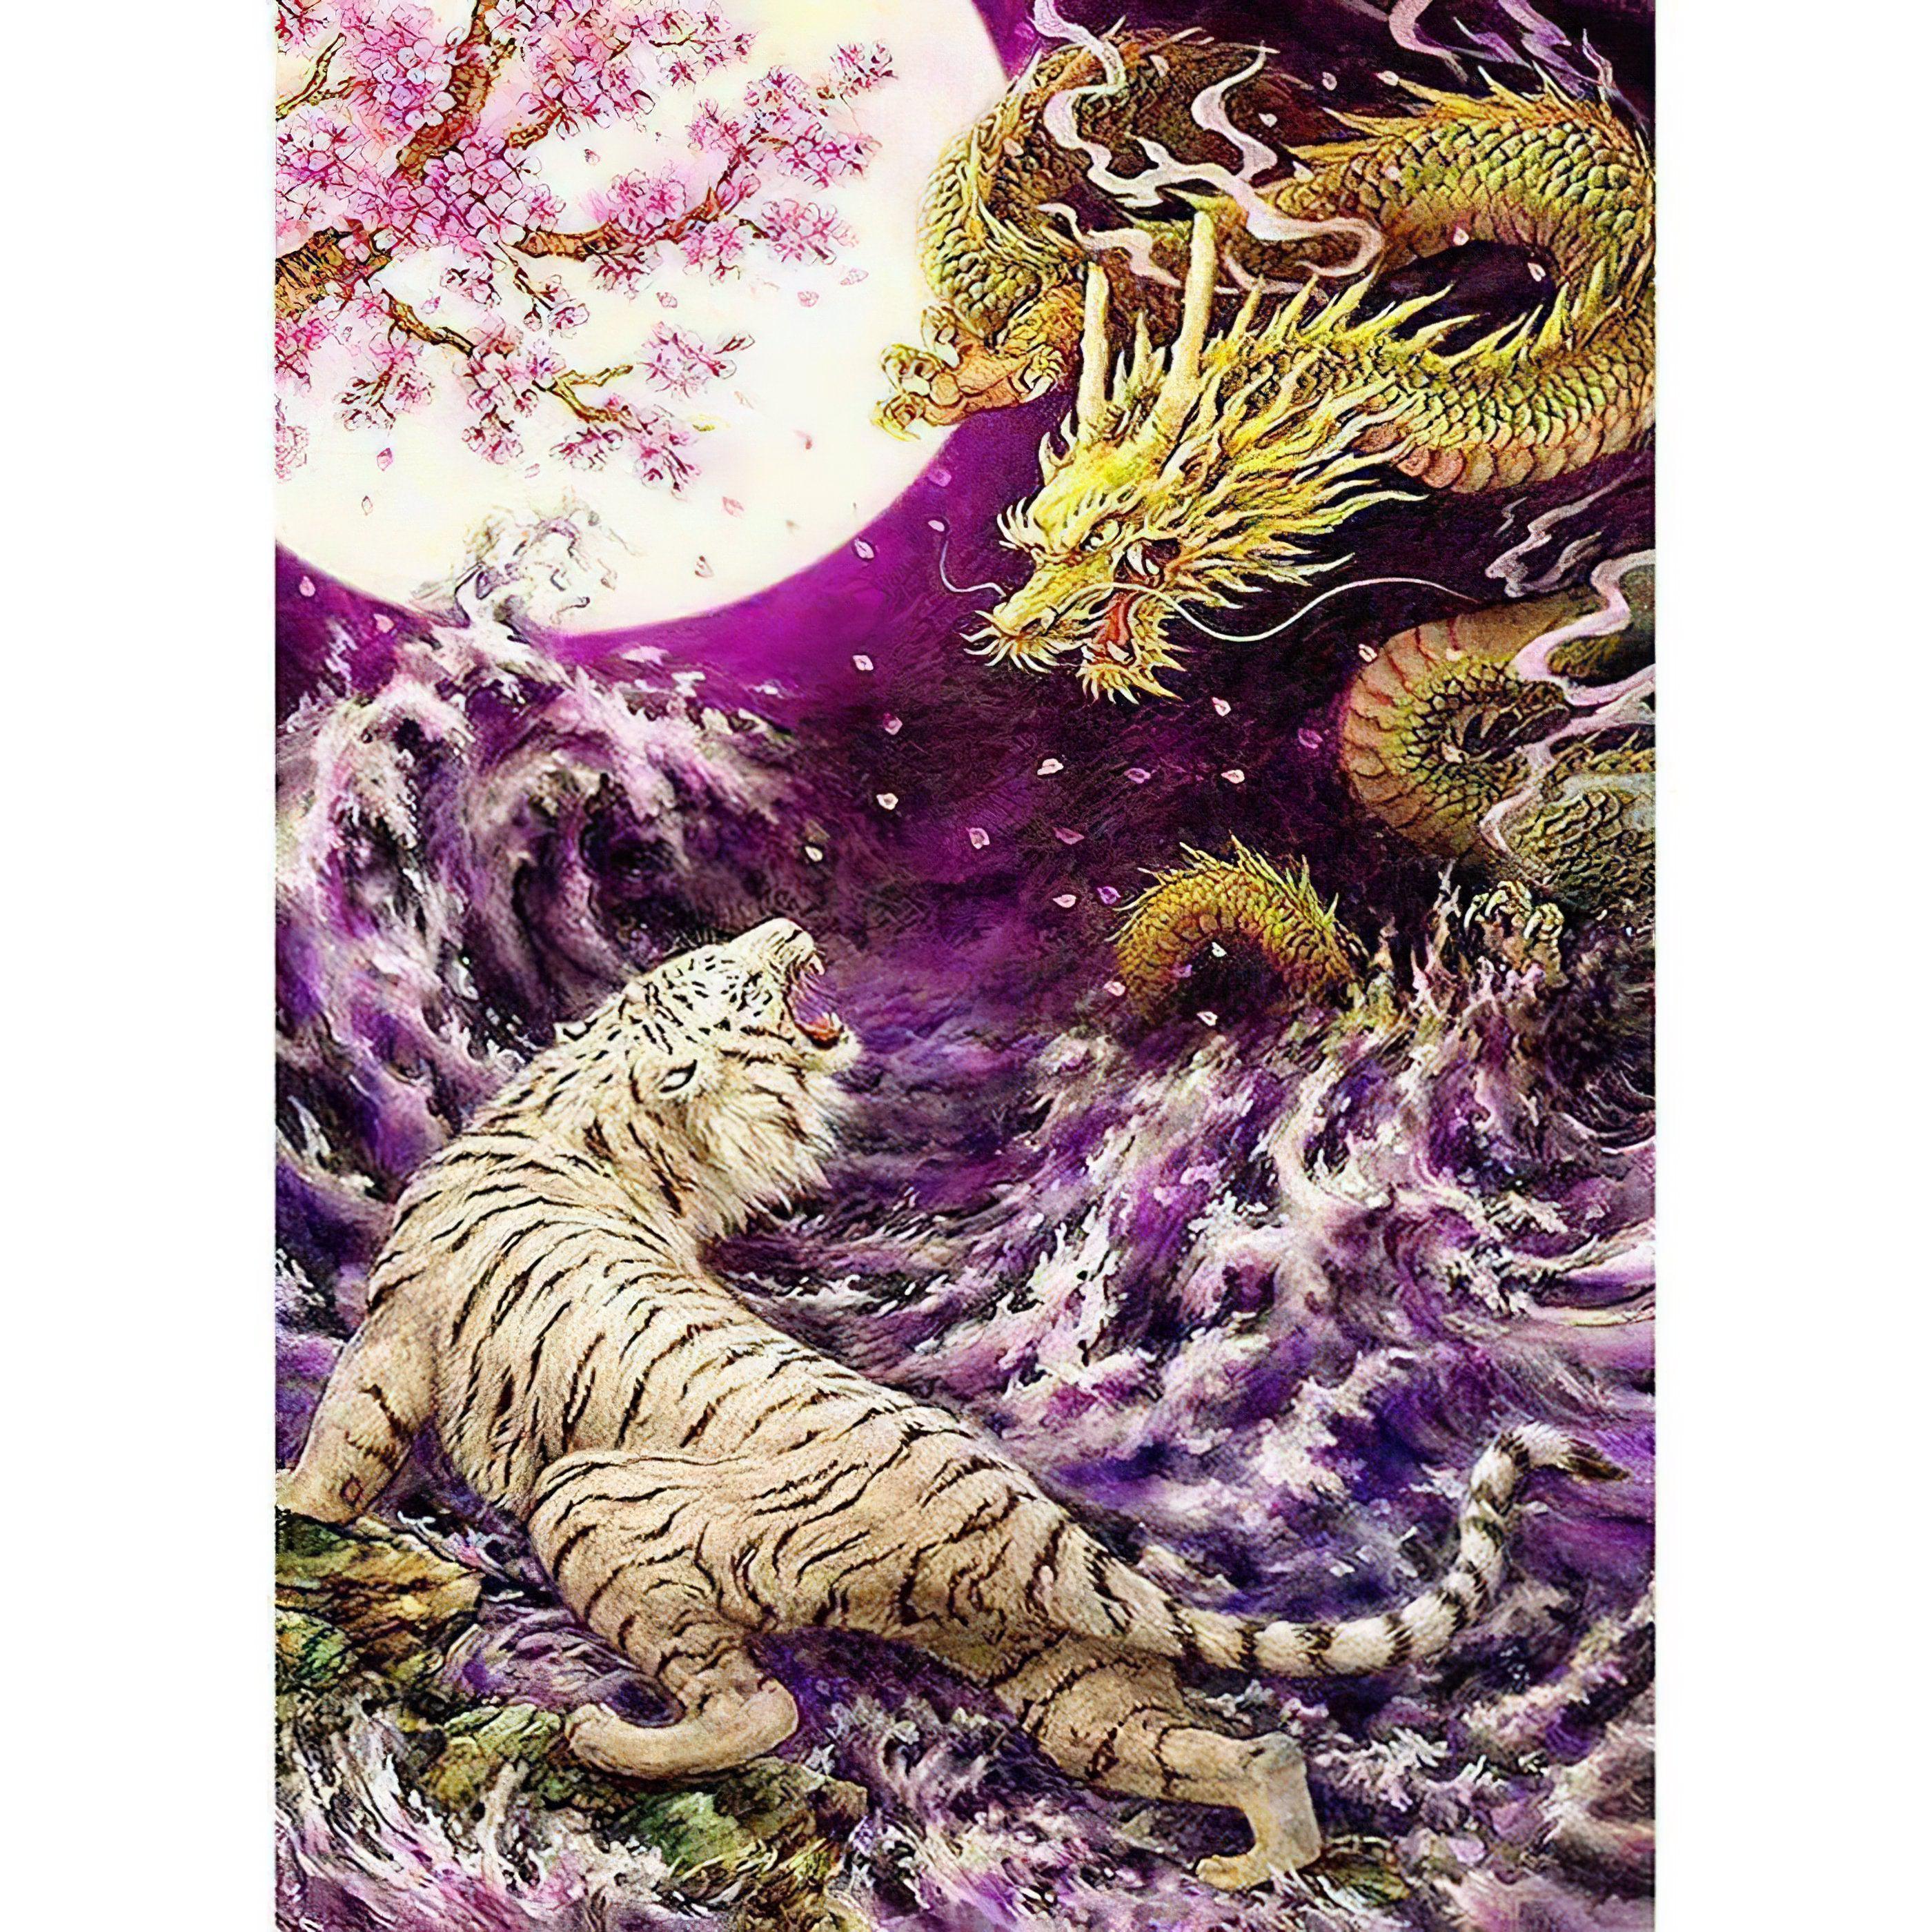 An epic battle between a Chinese dragon and a tiger, balance of power and grace.Chinese Dragon Vs Tiger - Diamondartlove